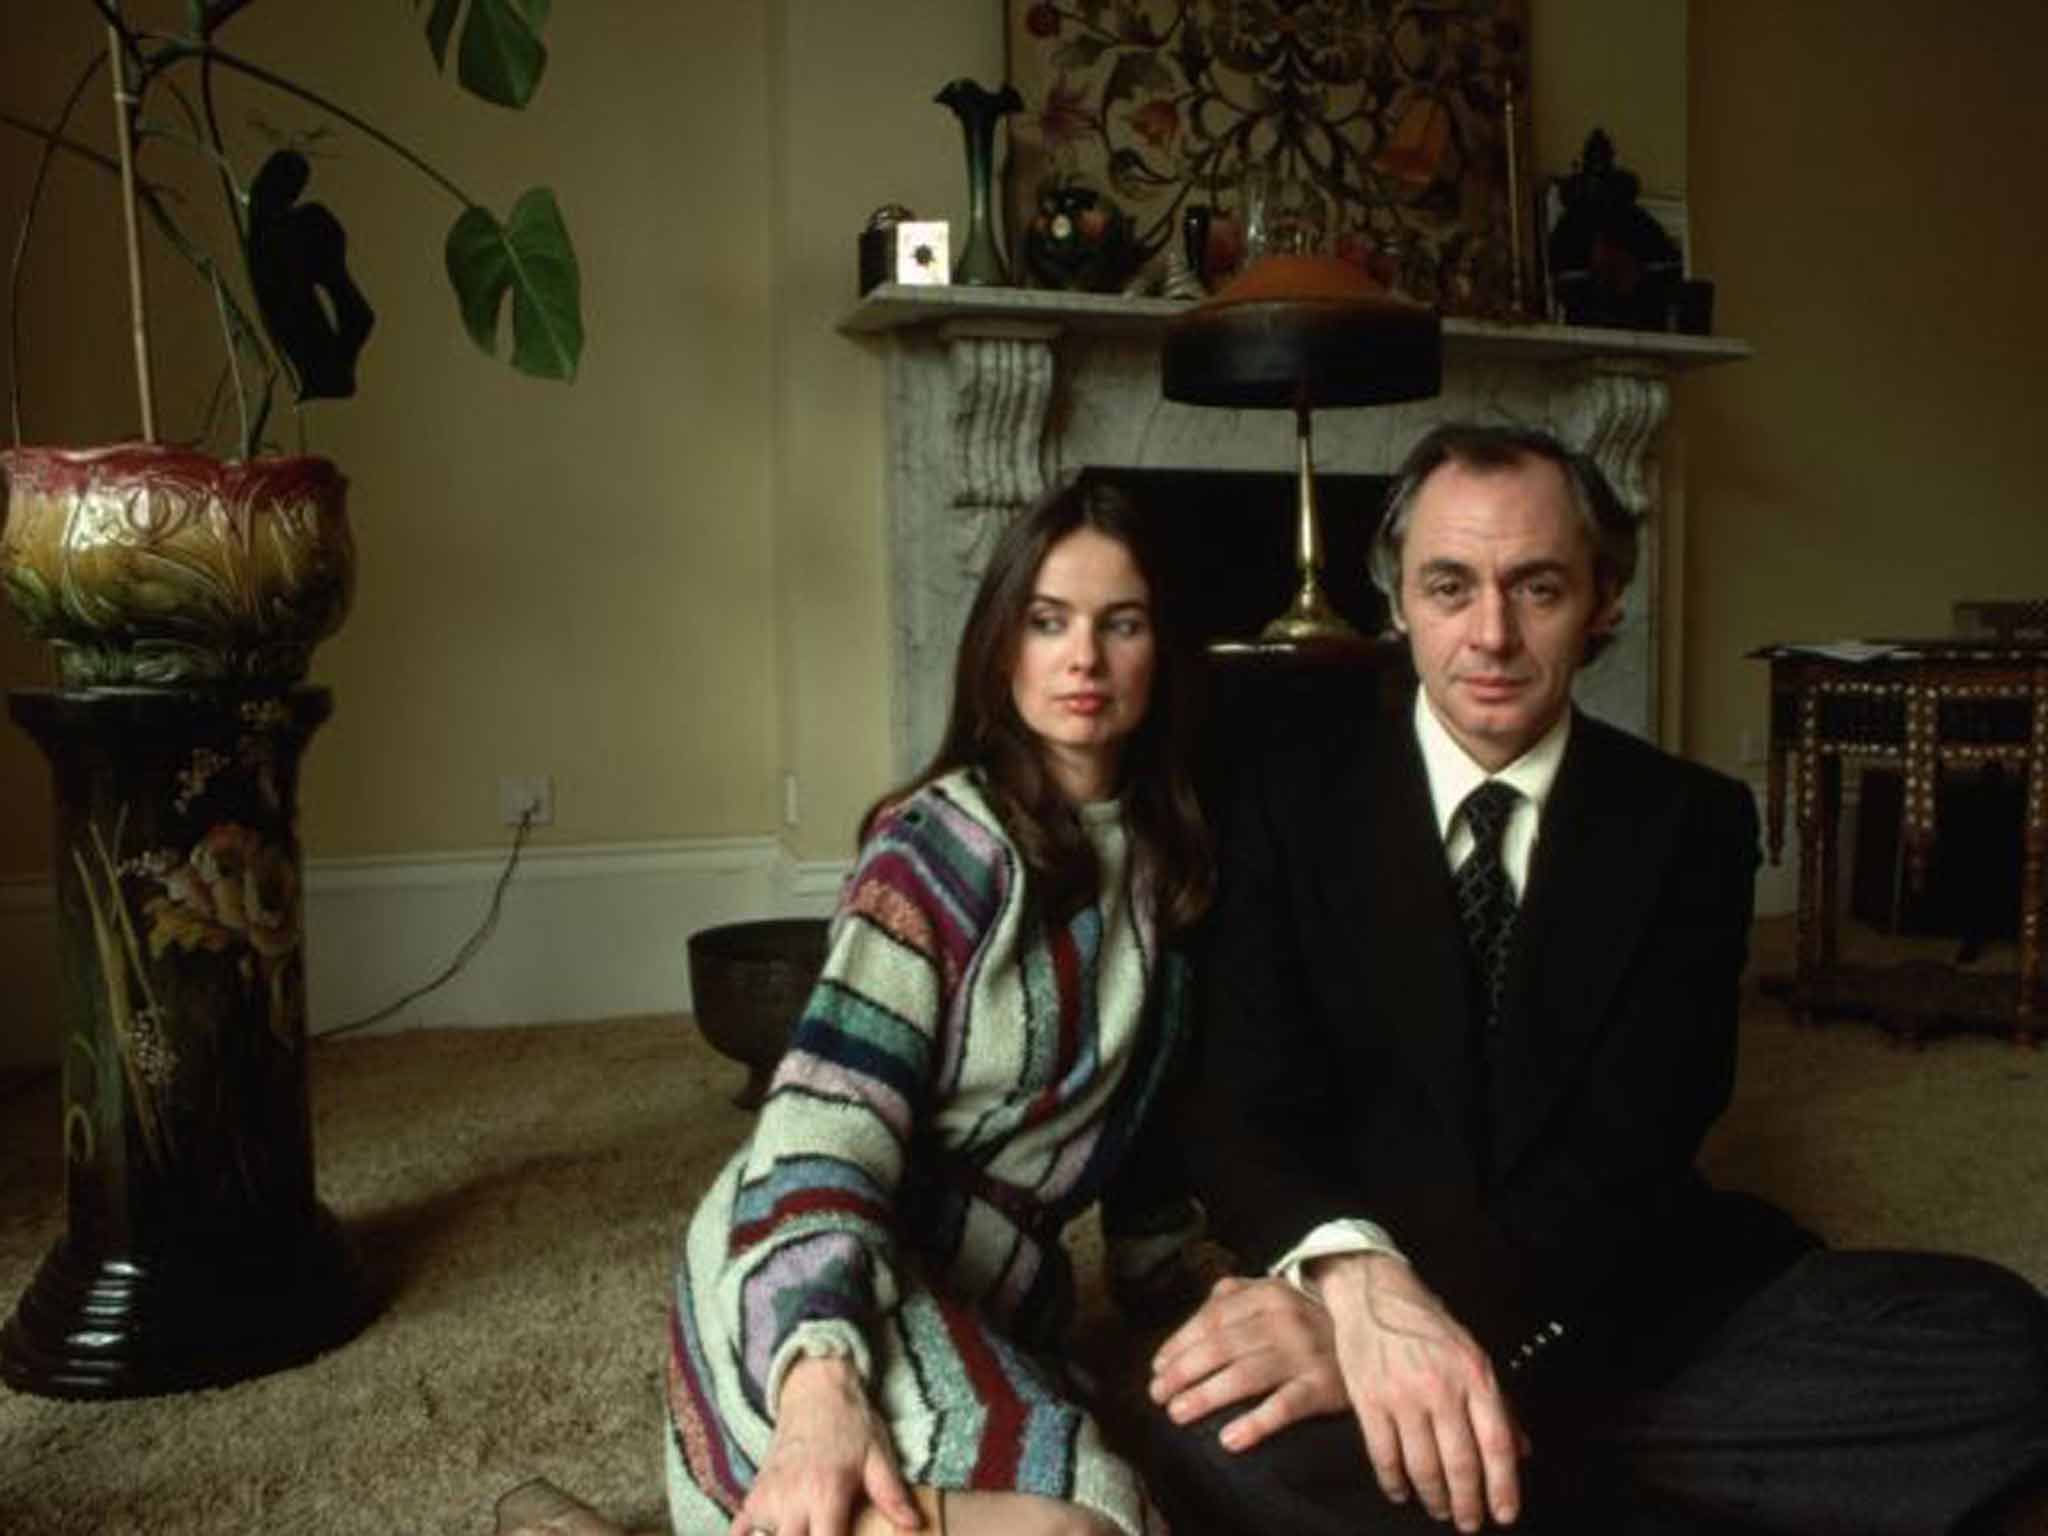 Analyse this: opinions are largely divided on the legacy of RD Laing